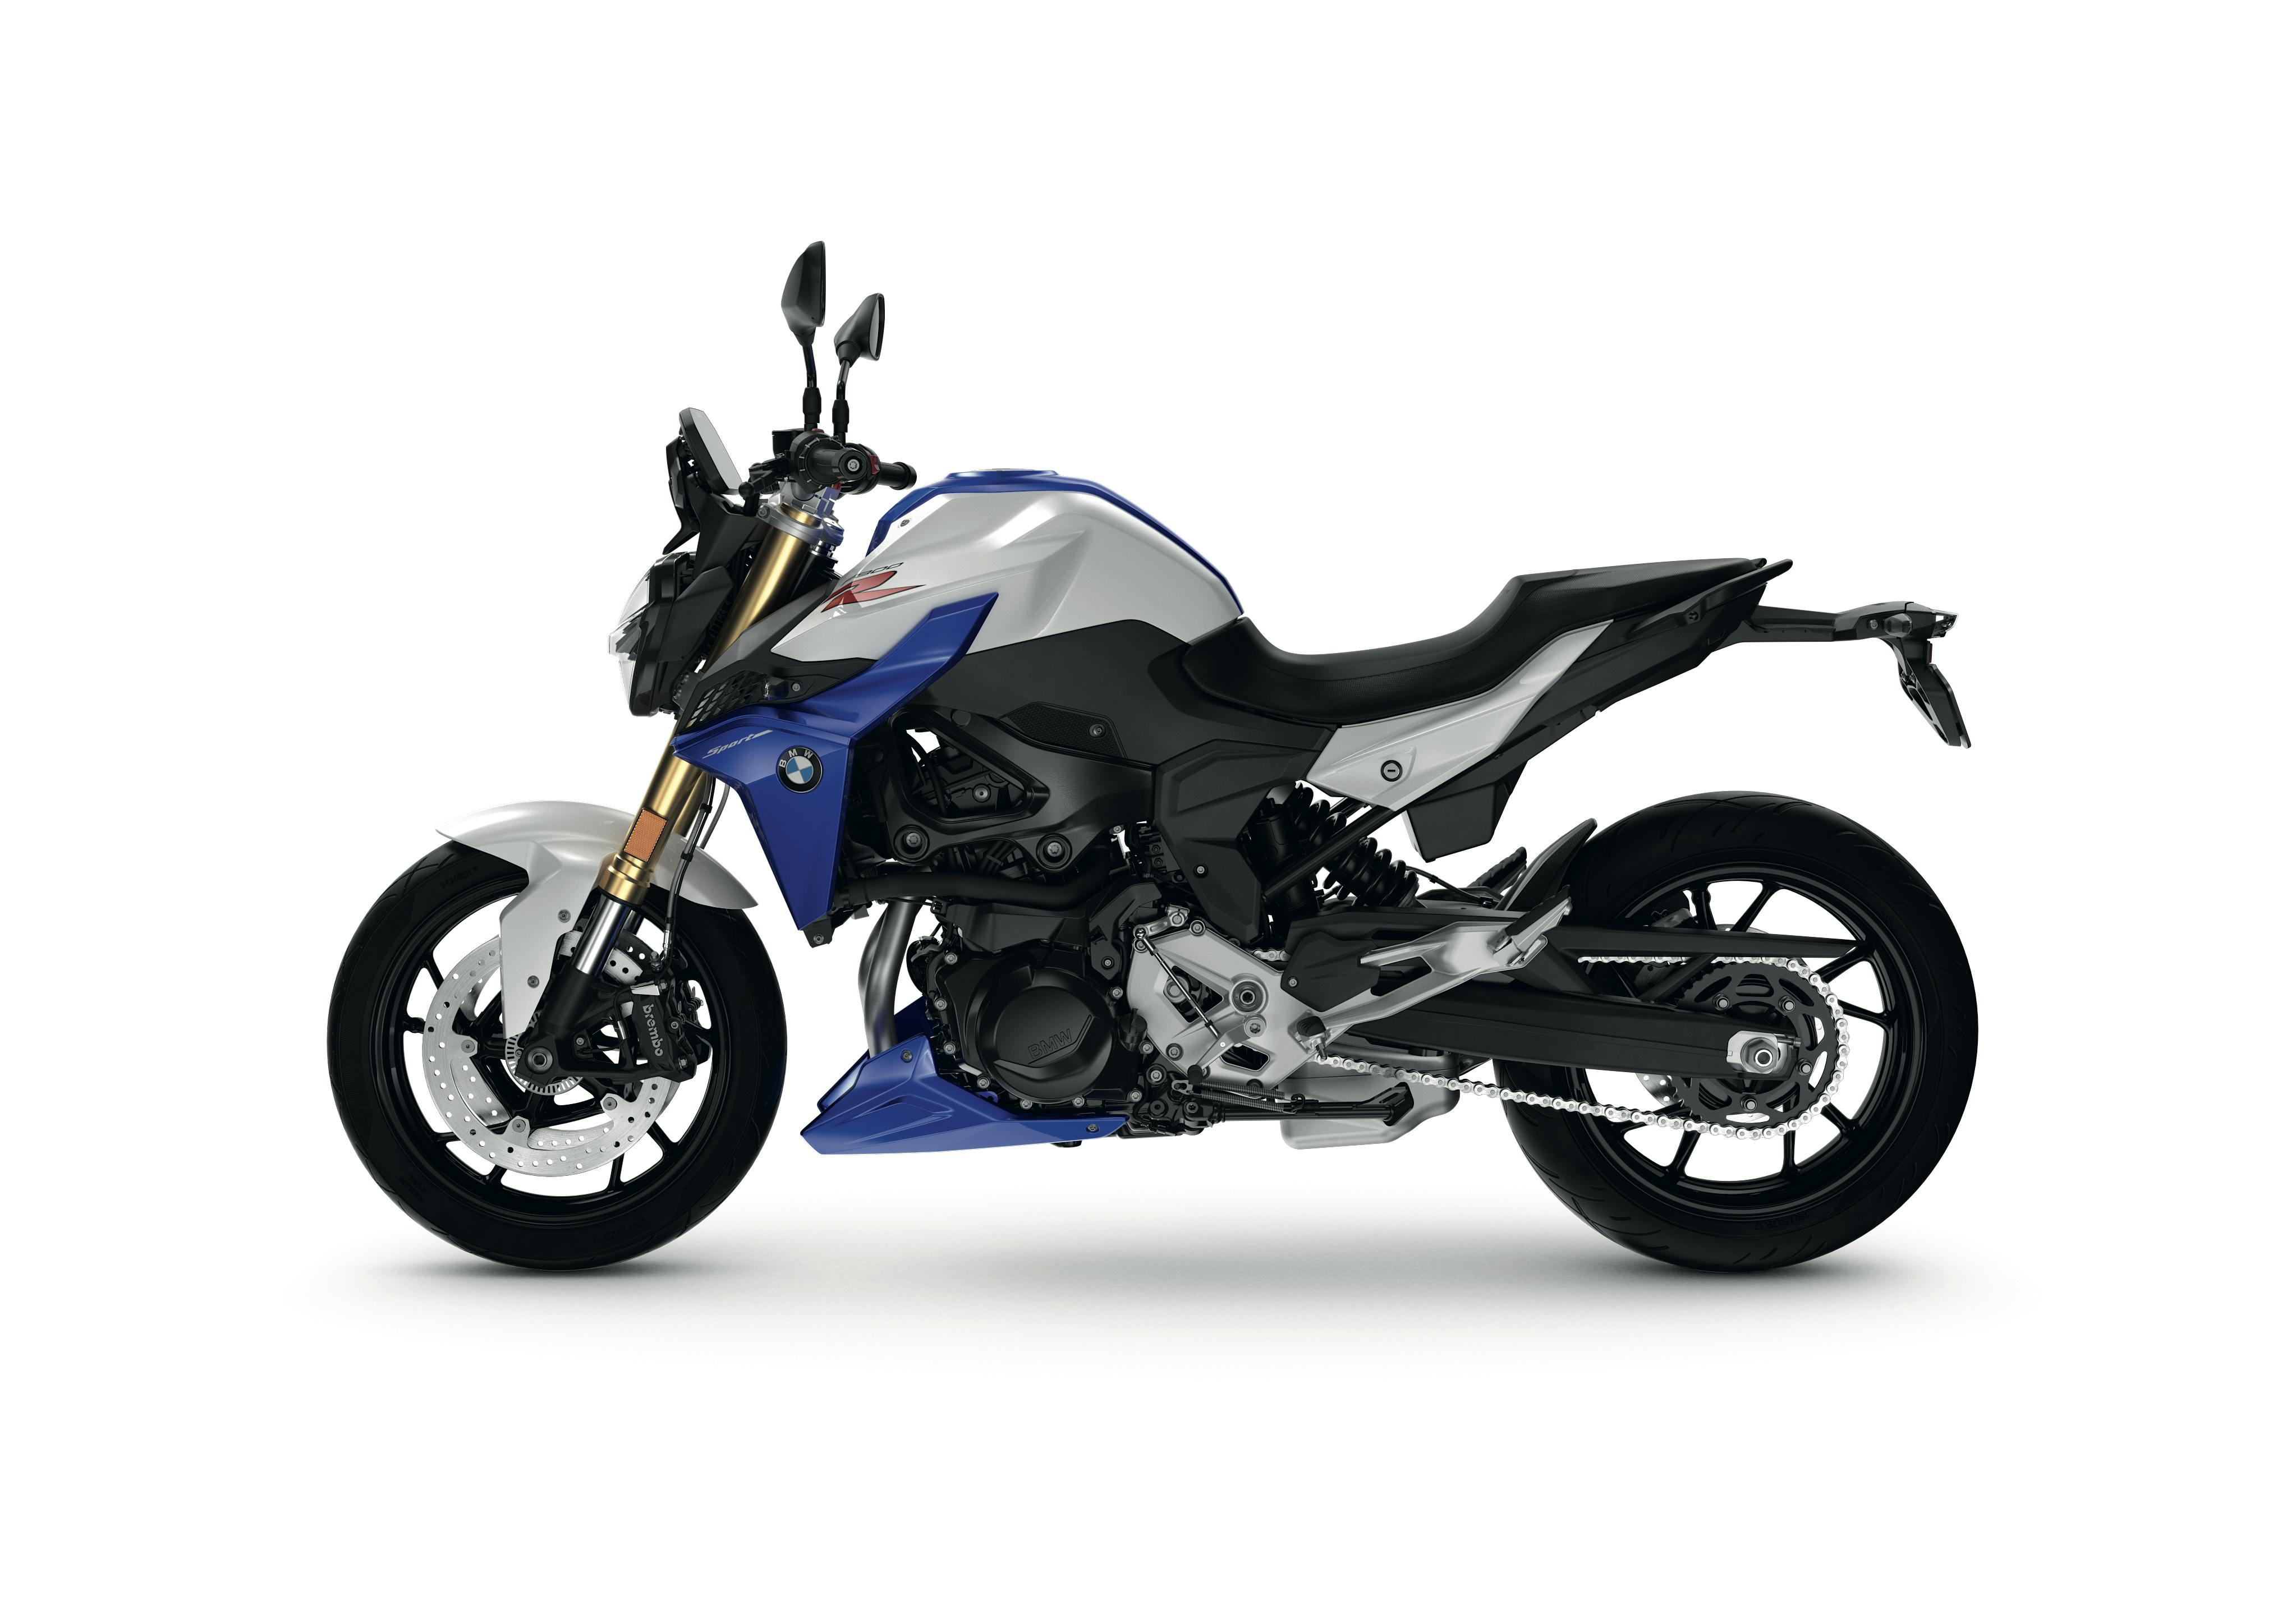 BMW F 900 R Sport in Light White / Racing Blue Metallic / Racing Red colour